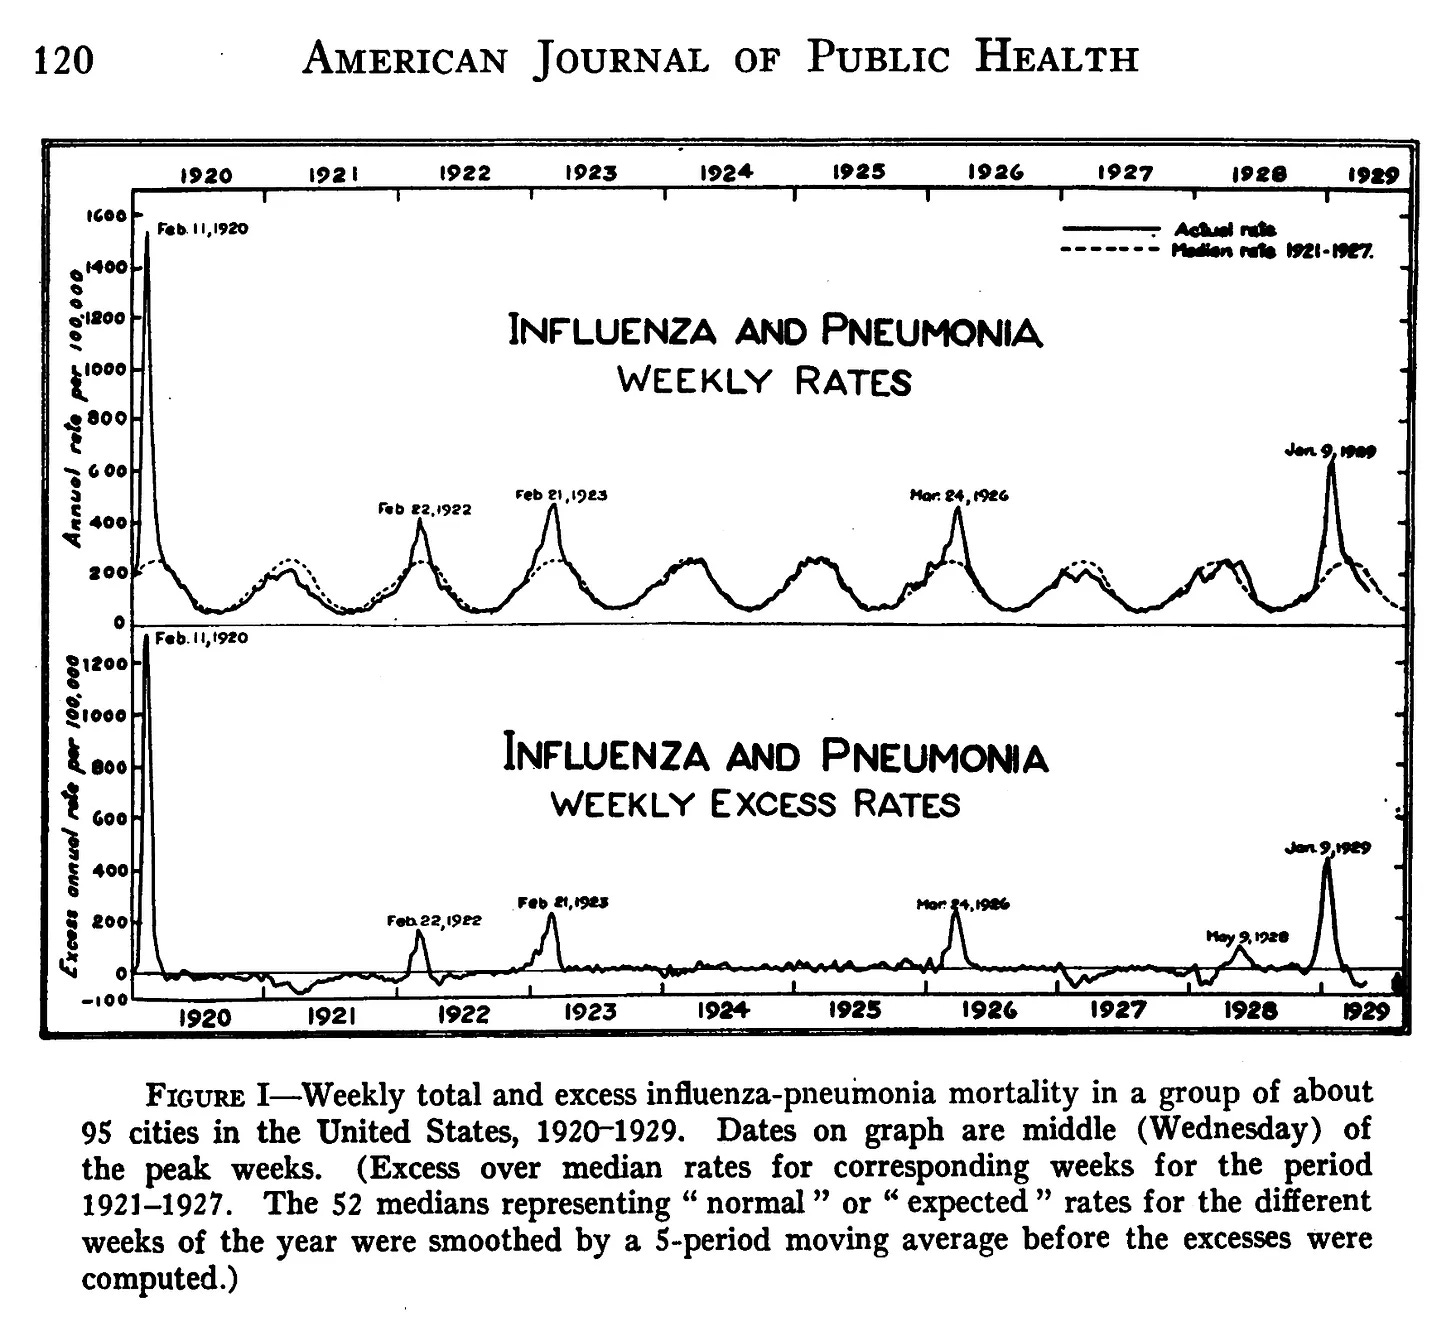 Image Description: The graph shows a top line of undulating lines across the graph for each flu season from 1920 to 1929, labeled weekly rates influenza and pneumonia. There are additional peaks that are above the expected rates for February 1922, February 1923, March 1926, and January 1929. In the lower graph labeled weekly excess rates, it shows peaks in February 1922, February 1923, March 1926, May 1928, and January 1929.